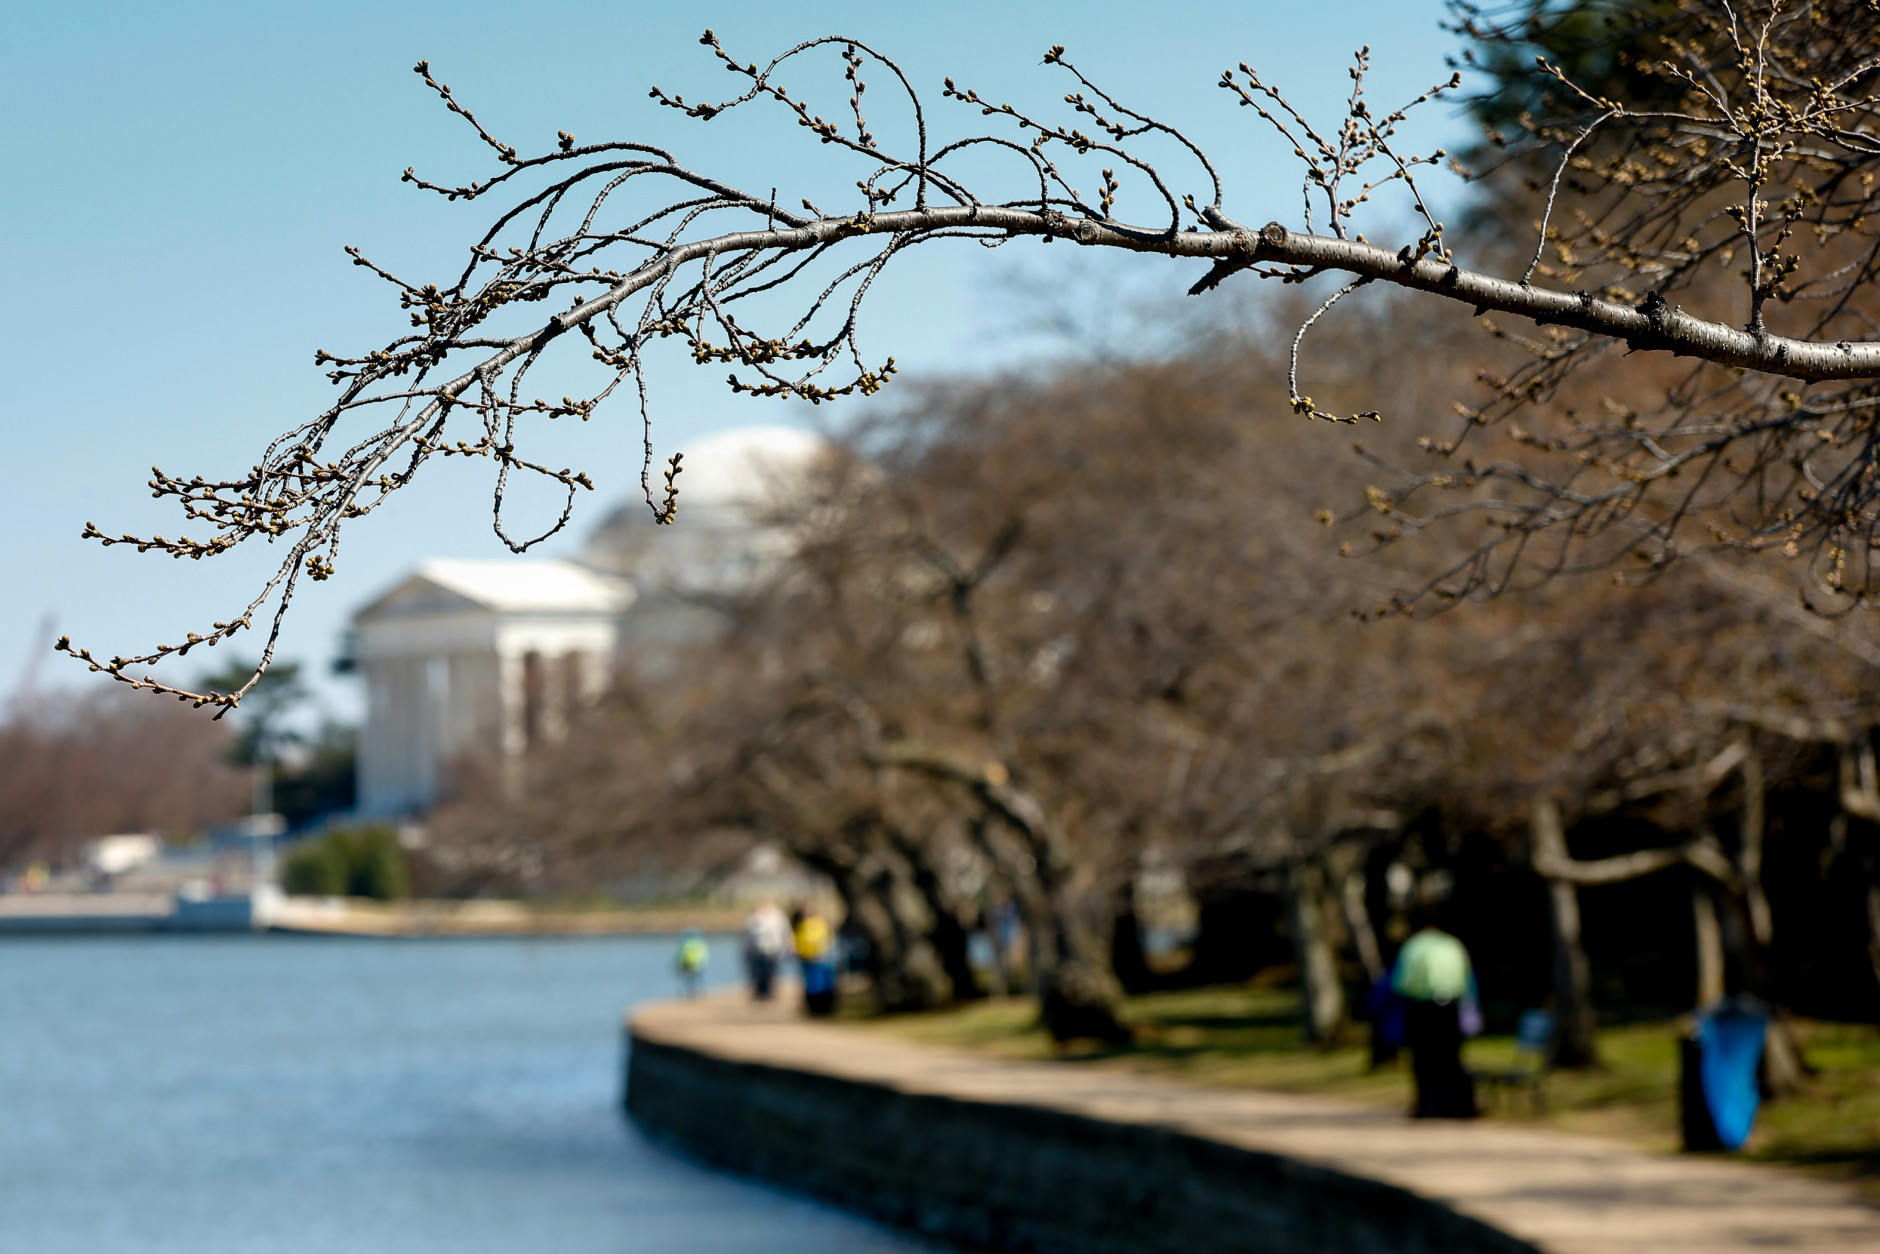 Cherry blossoms trees are near blooming along the Tidal Basin near the Jefferson Memorial in Washington, Wednesday, April 1, 2015. Officials are calling for a peak bloom period from April 11-14th, one week later then last year. (AP Photo/Andrew Harnik)